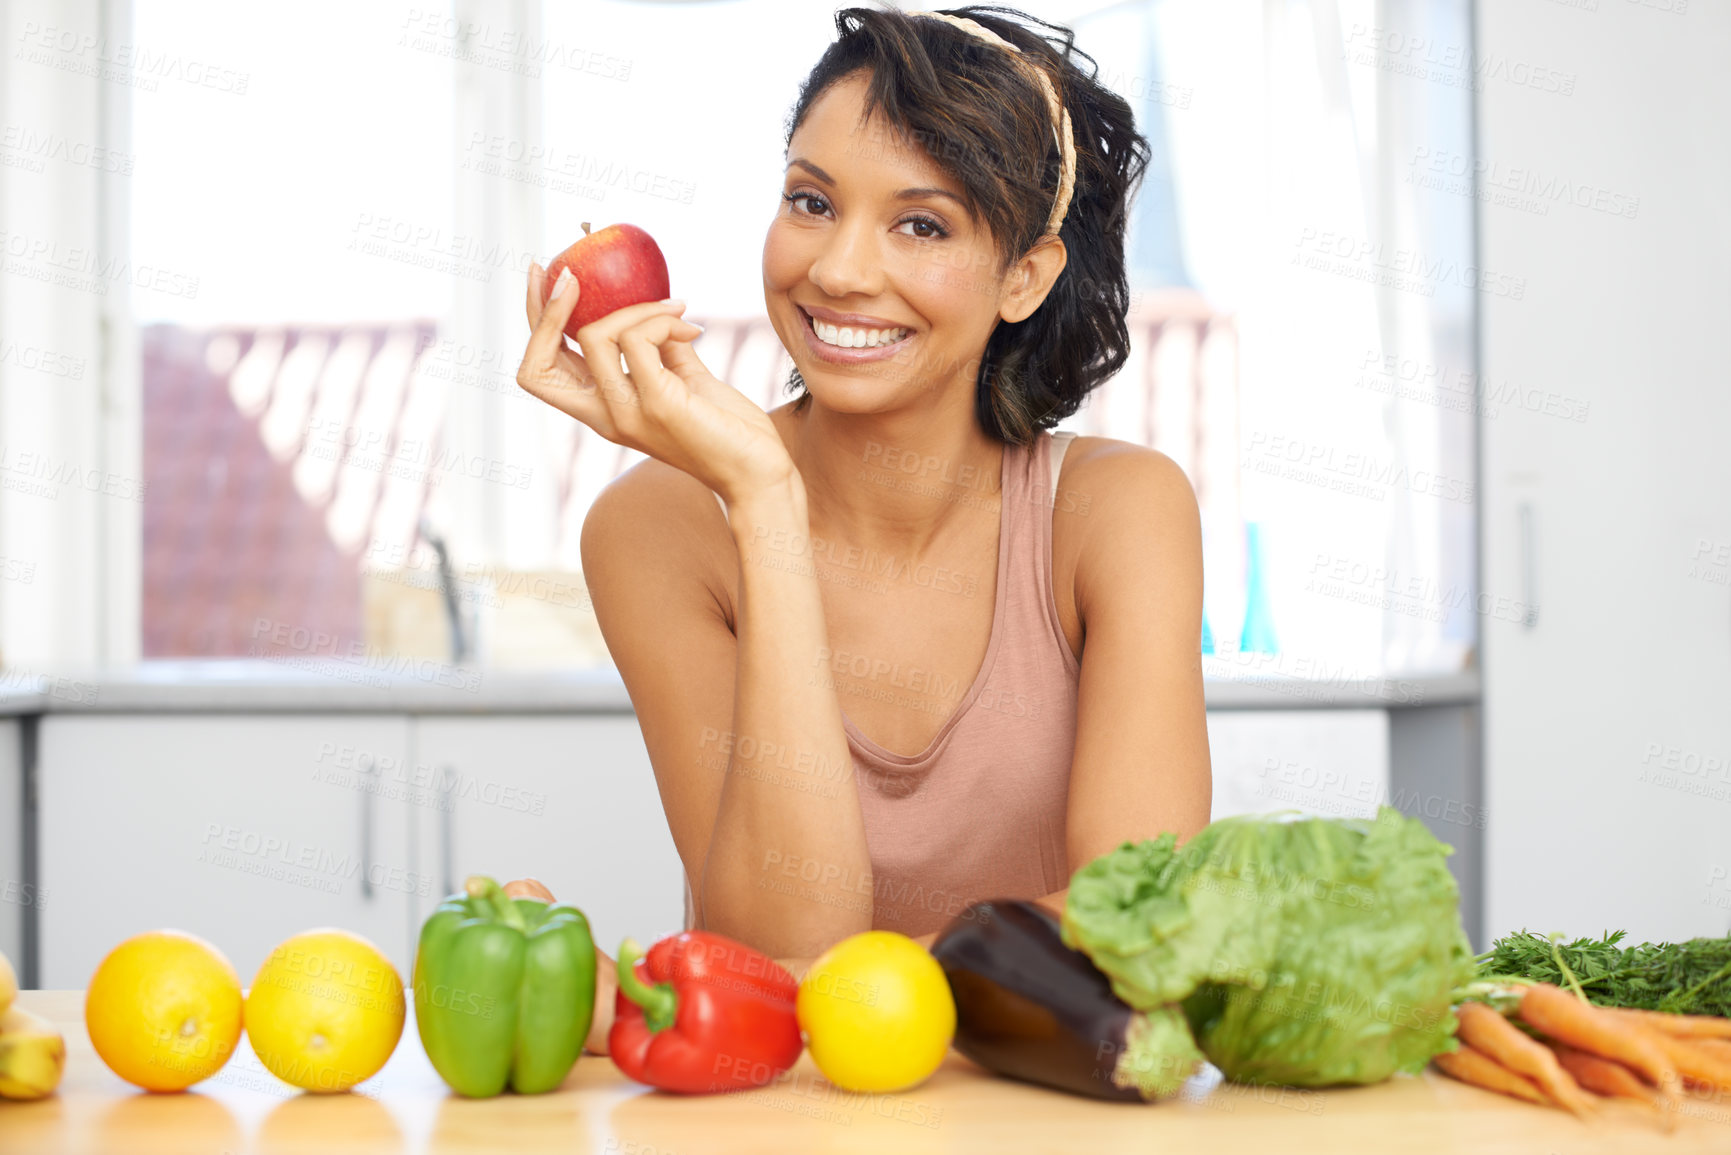 Buy stock photo Portrait of a young woman standing in a kitchen with a line of fresh produce before her